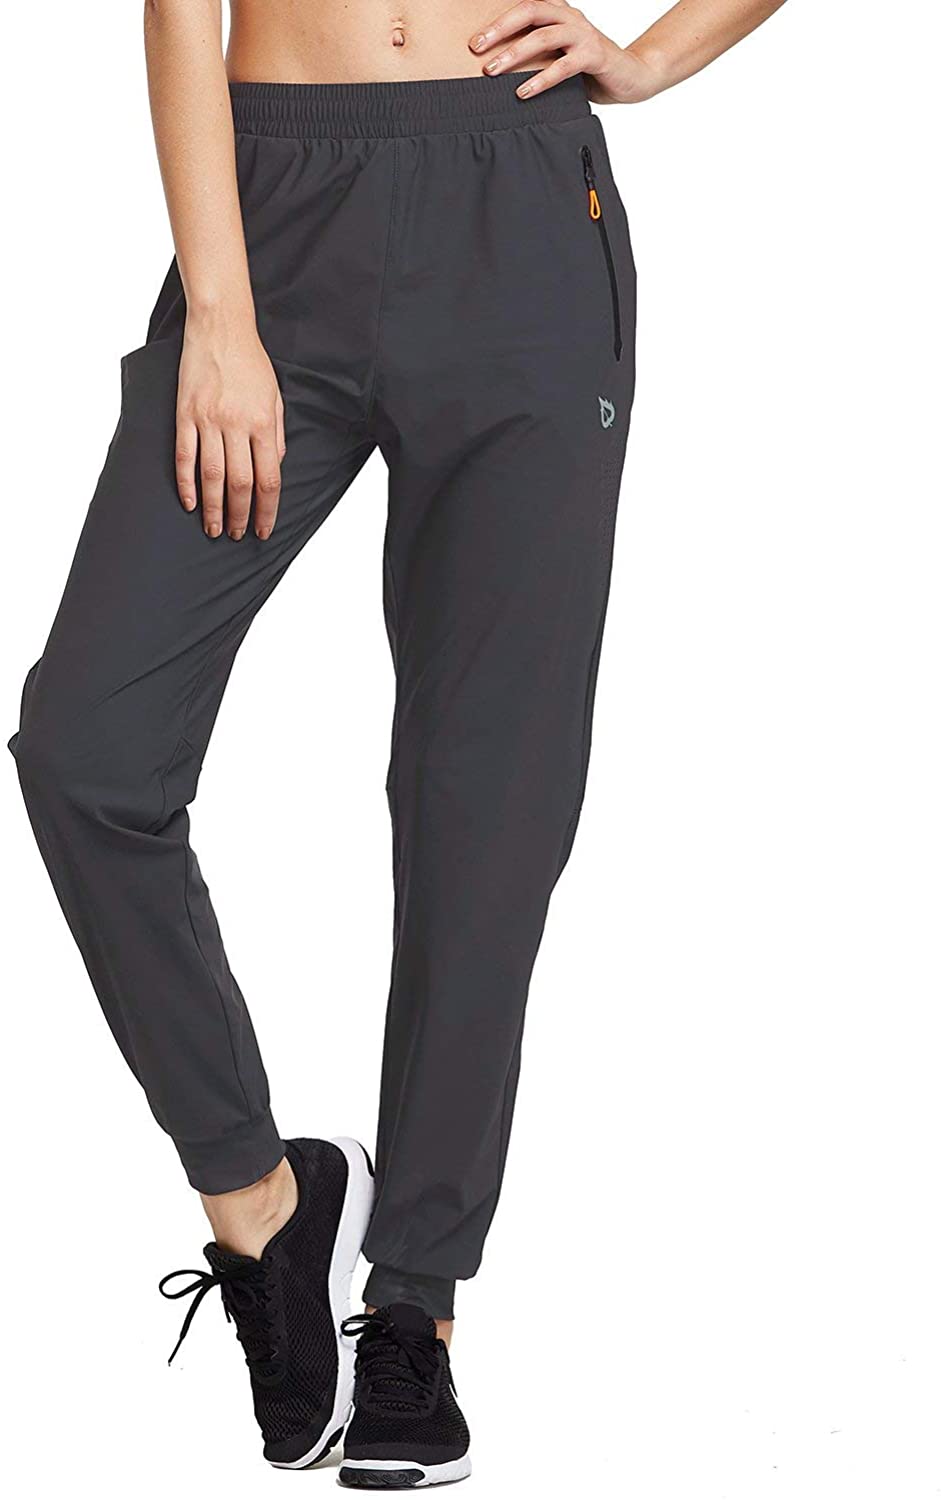 BALEAF Women's Athletic Joggers Quick Dry Running Hiking Workout